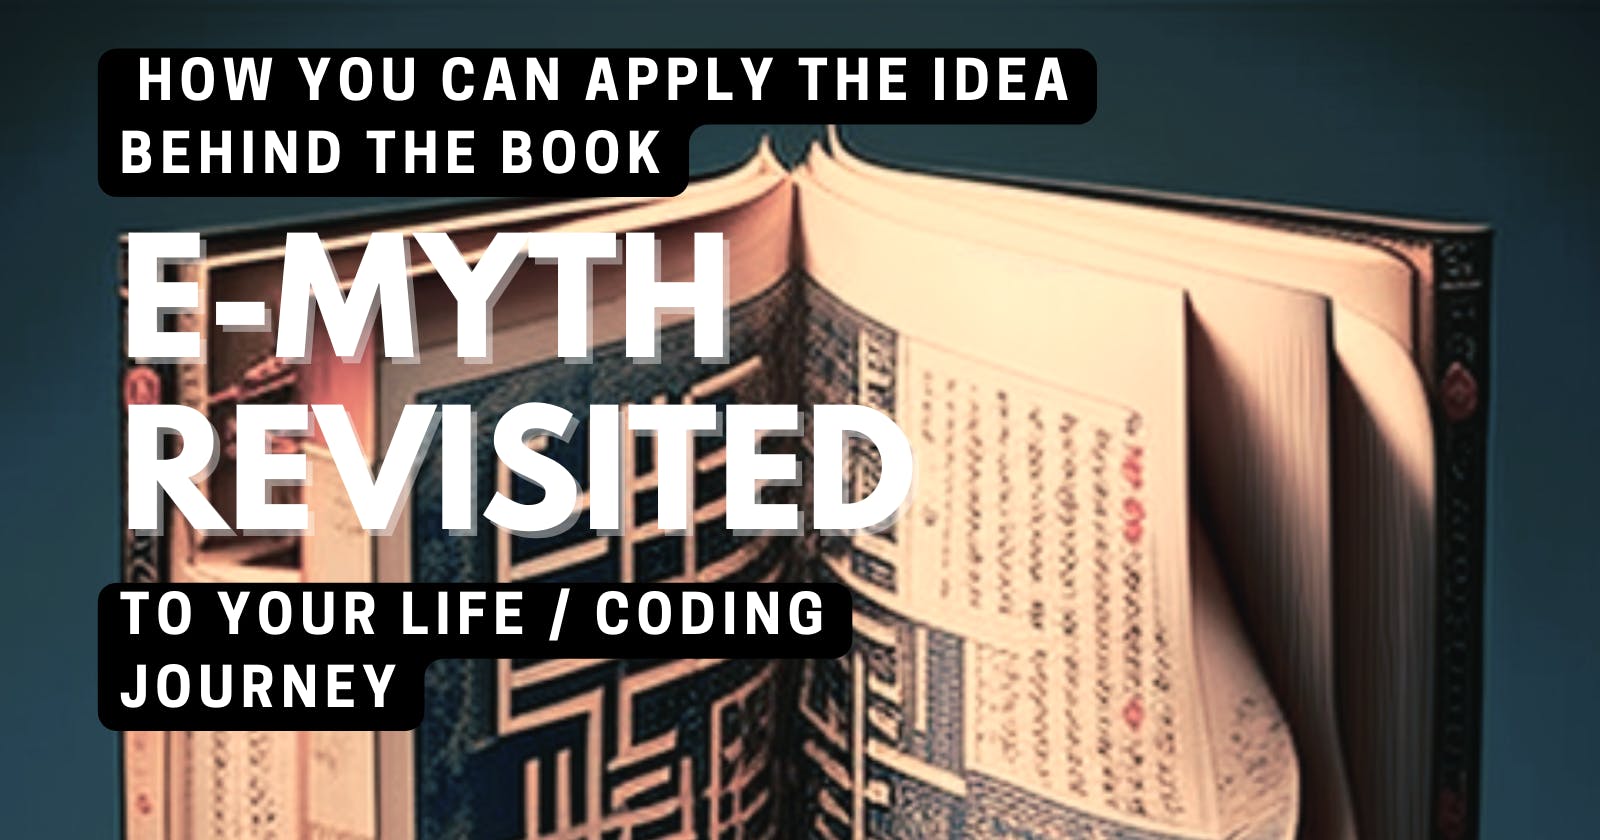 How you can apply the idea behind the book to your life / coding journey.